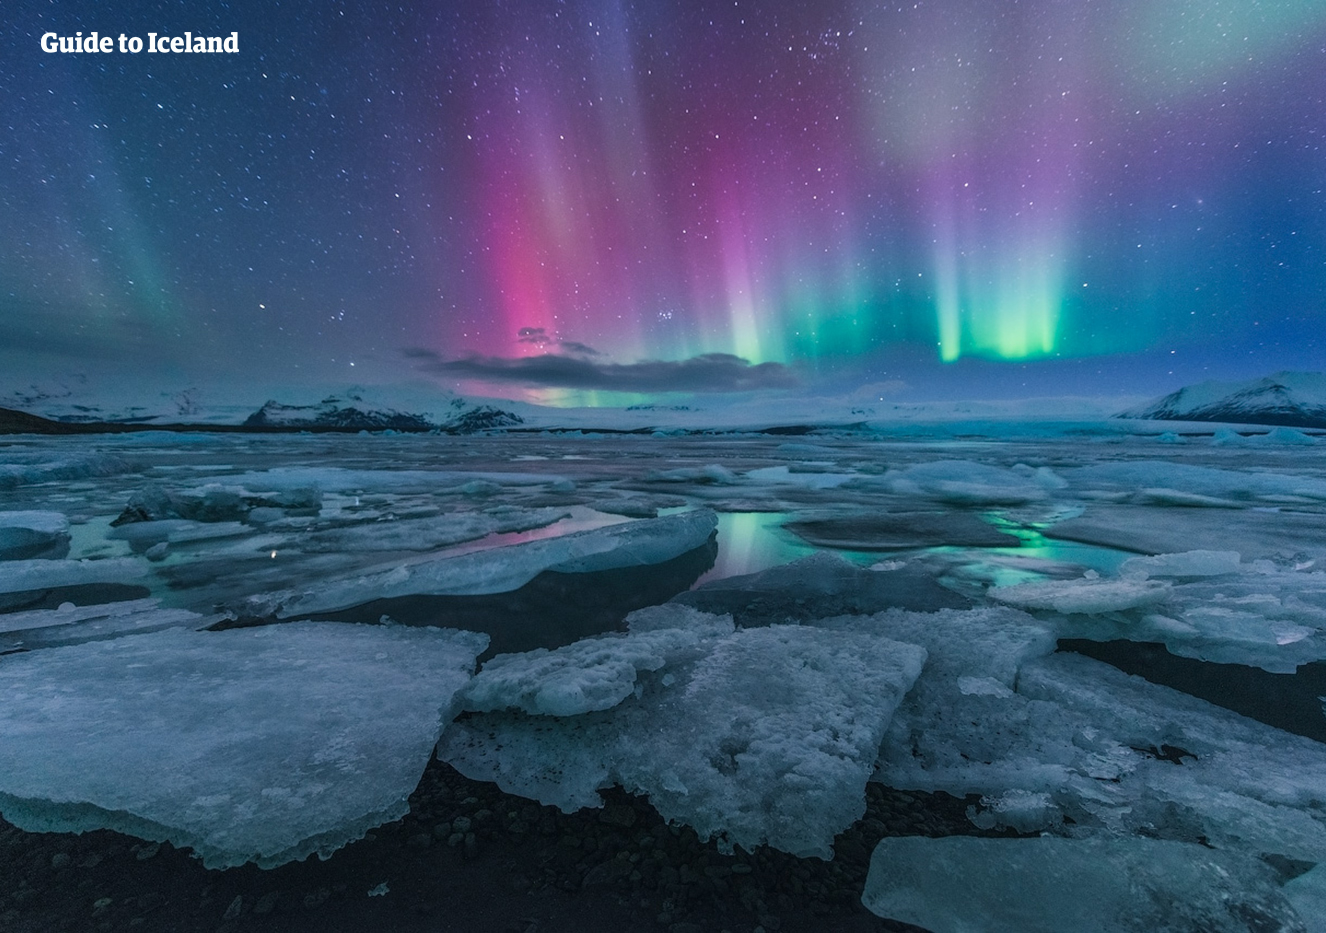 Blue northern lights dancing with purple shades over South Iceland's Jökulsárlón glacier lagoon in winter.